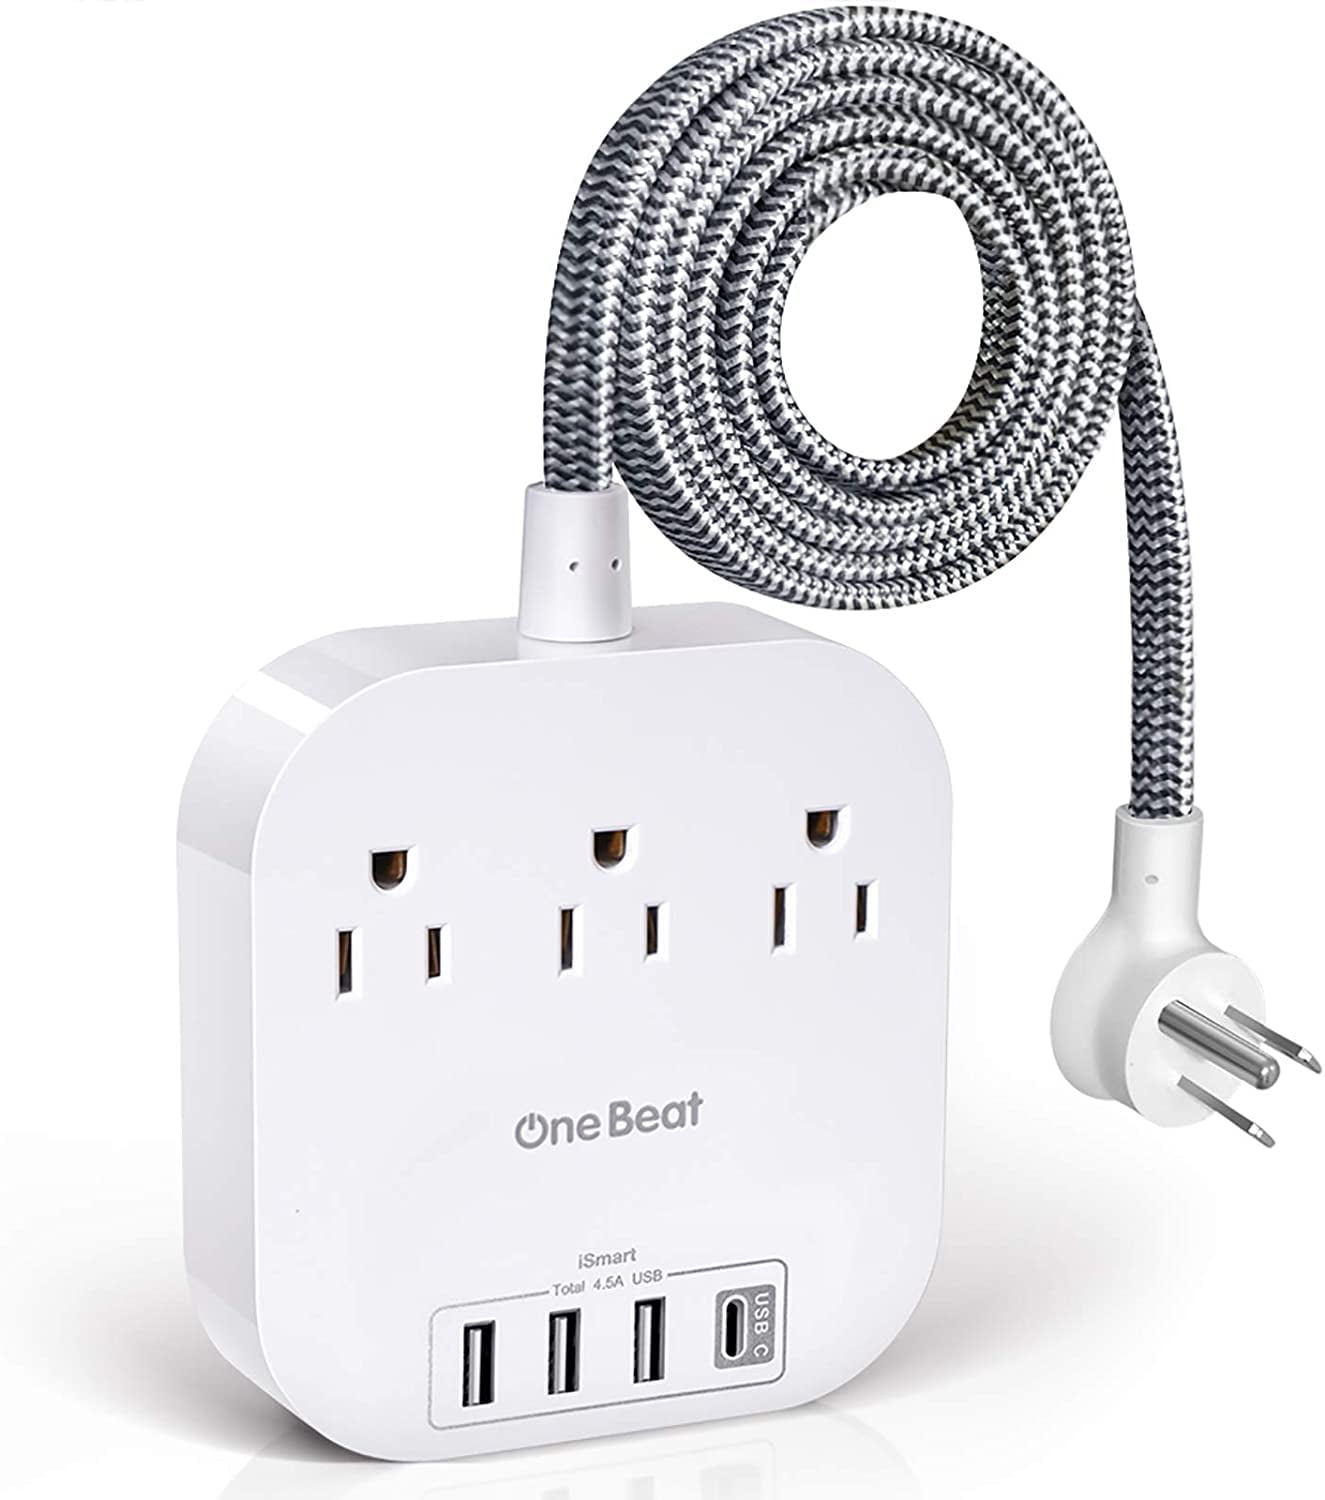 4.5A Flat Plug Extension Cord with 2 Outlet 4 USB Ports Home Office Desktop Charging Station for Nightstand Power Strip with USB 5 Ft Long Extension Cord Dorm 